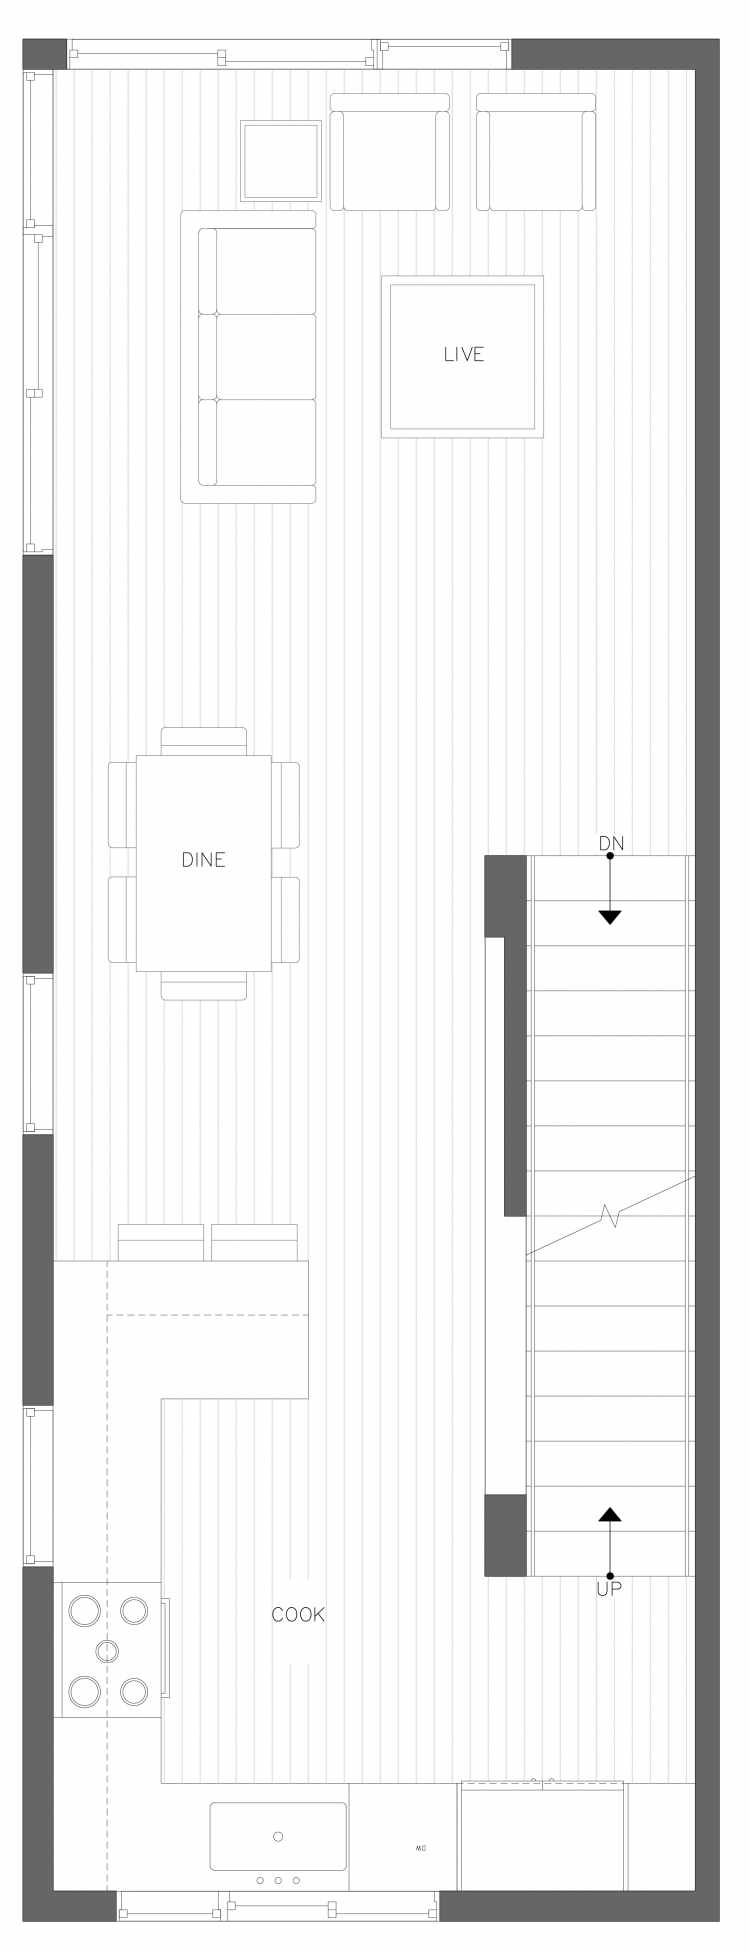 Second Floor Plan of 3418A 15th Ave W, One of the Arlo Townhomes in North Queen Anne